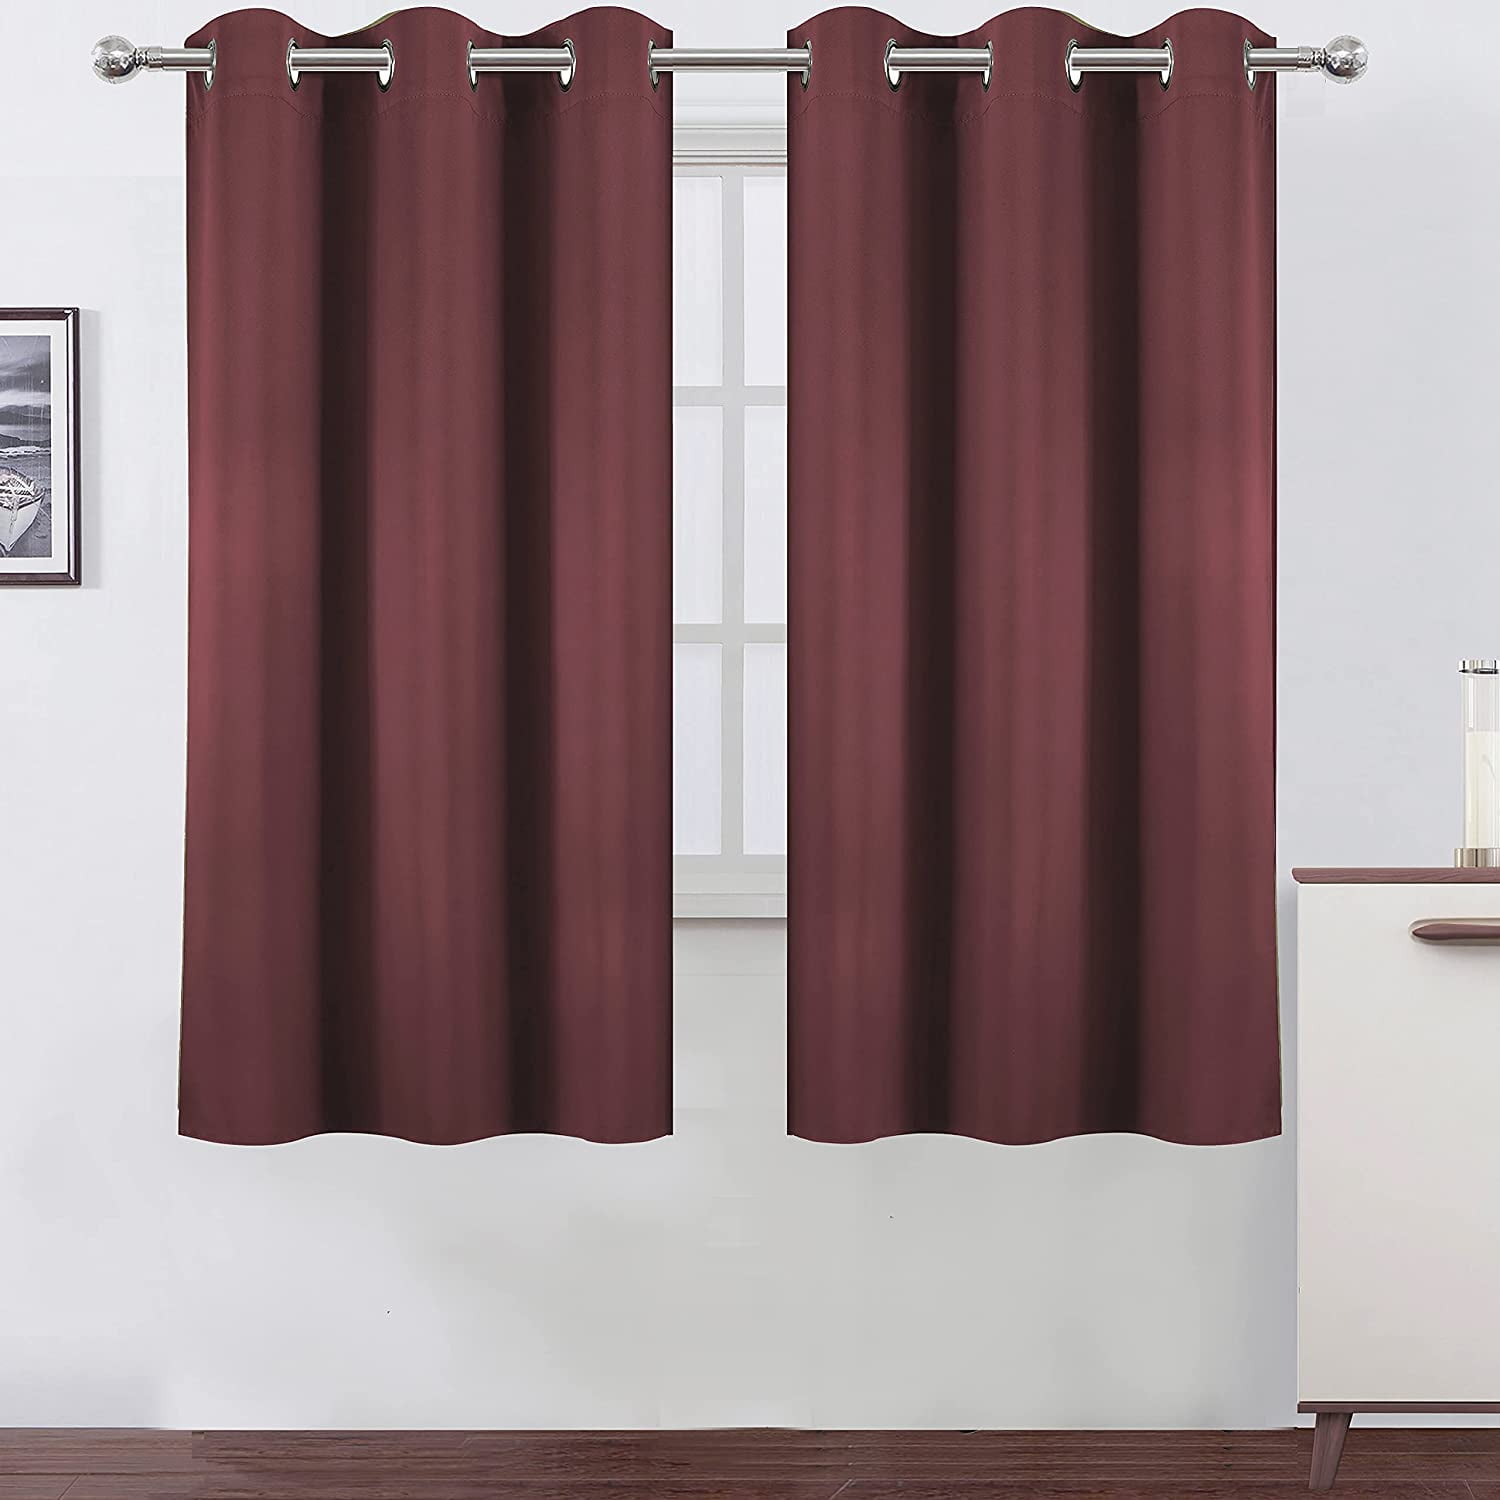 Burgundy Solid Blackout Curtains for Bedroom-Thermal Insulated Room Darkening 